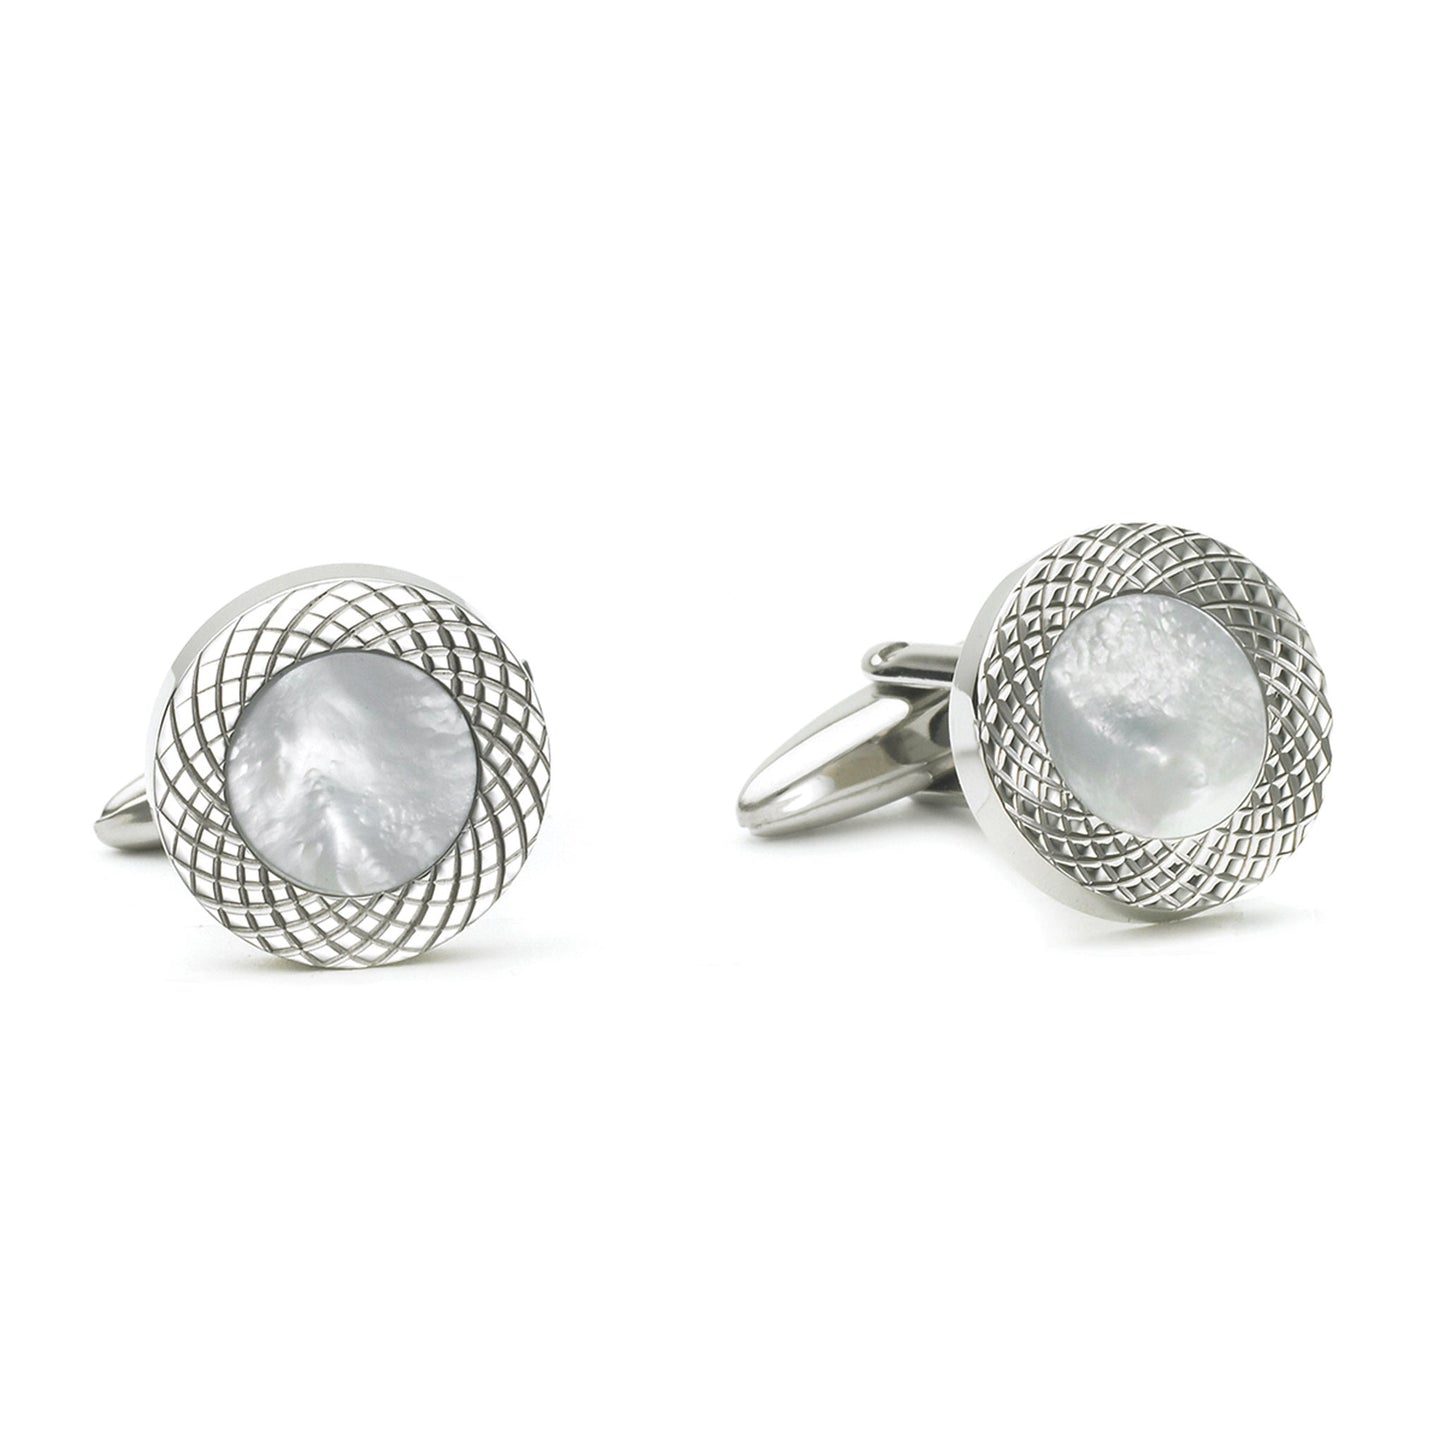 A stainless steel round cufflinks with mother of pearl displayed on a neutral white background.